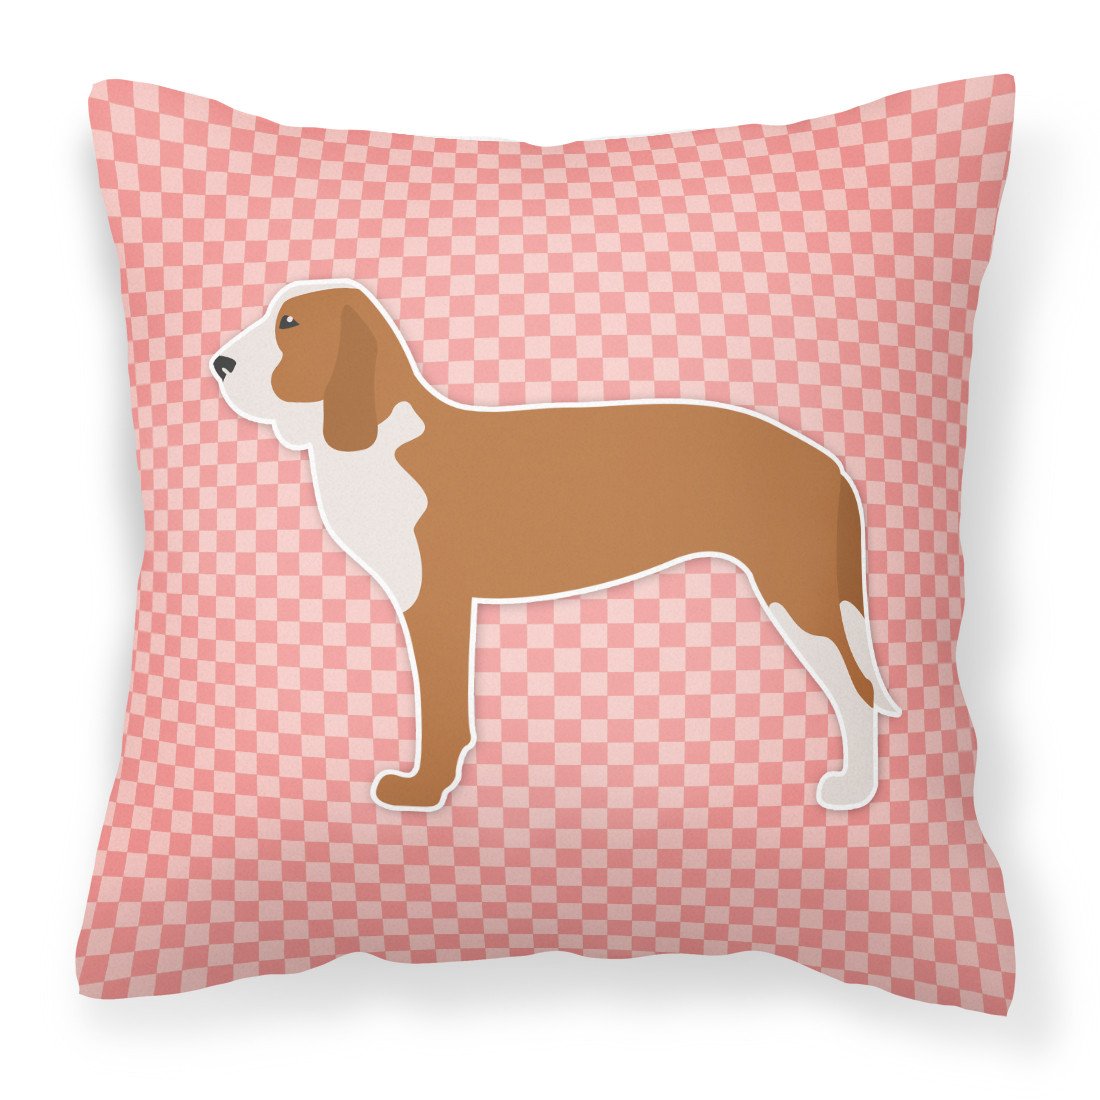 Spanish Hound Checkerboard Pink Fabric Decorative Pillow BB3591PW1818 by Caroline's Treasures